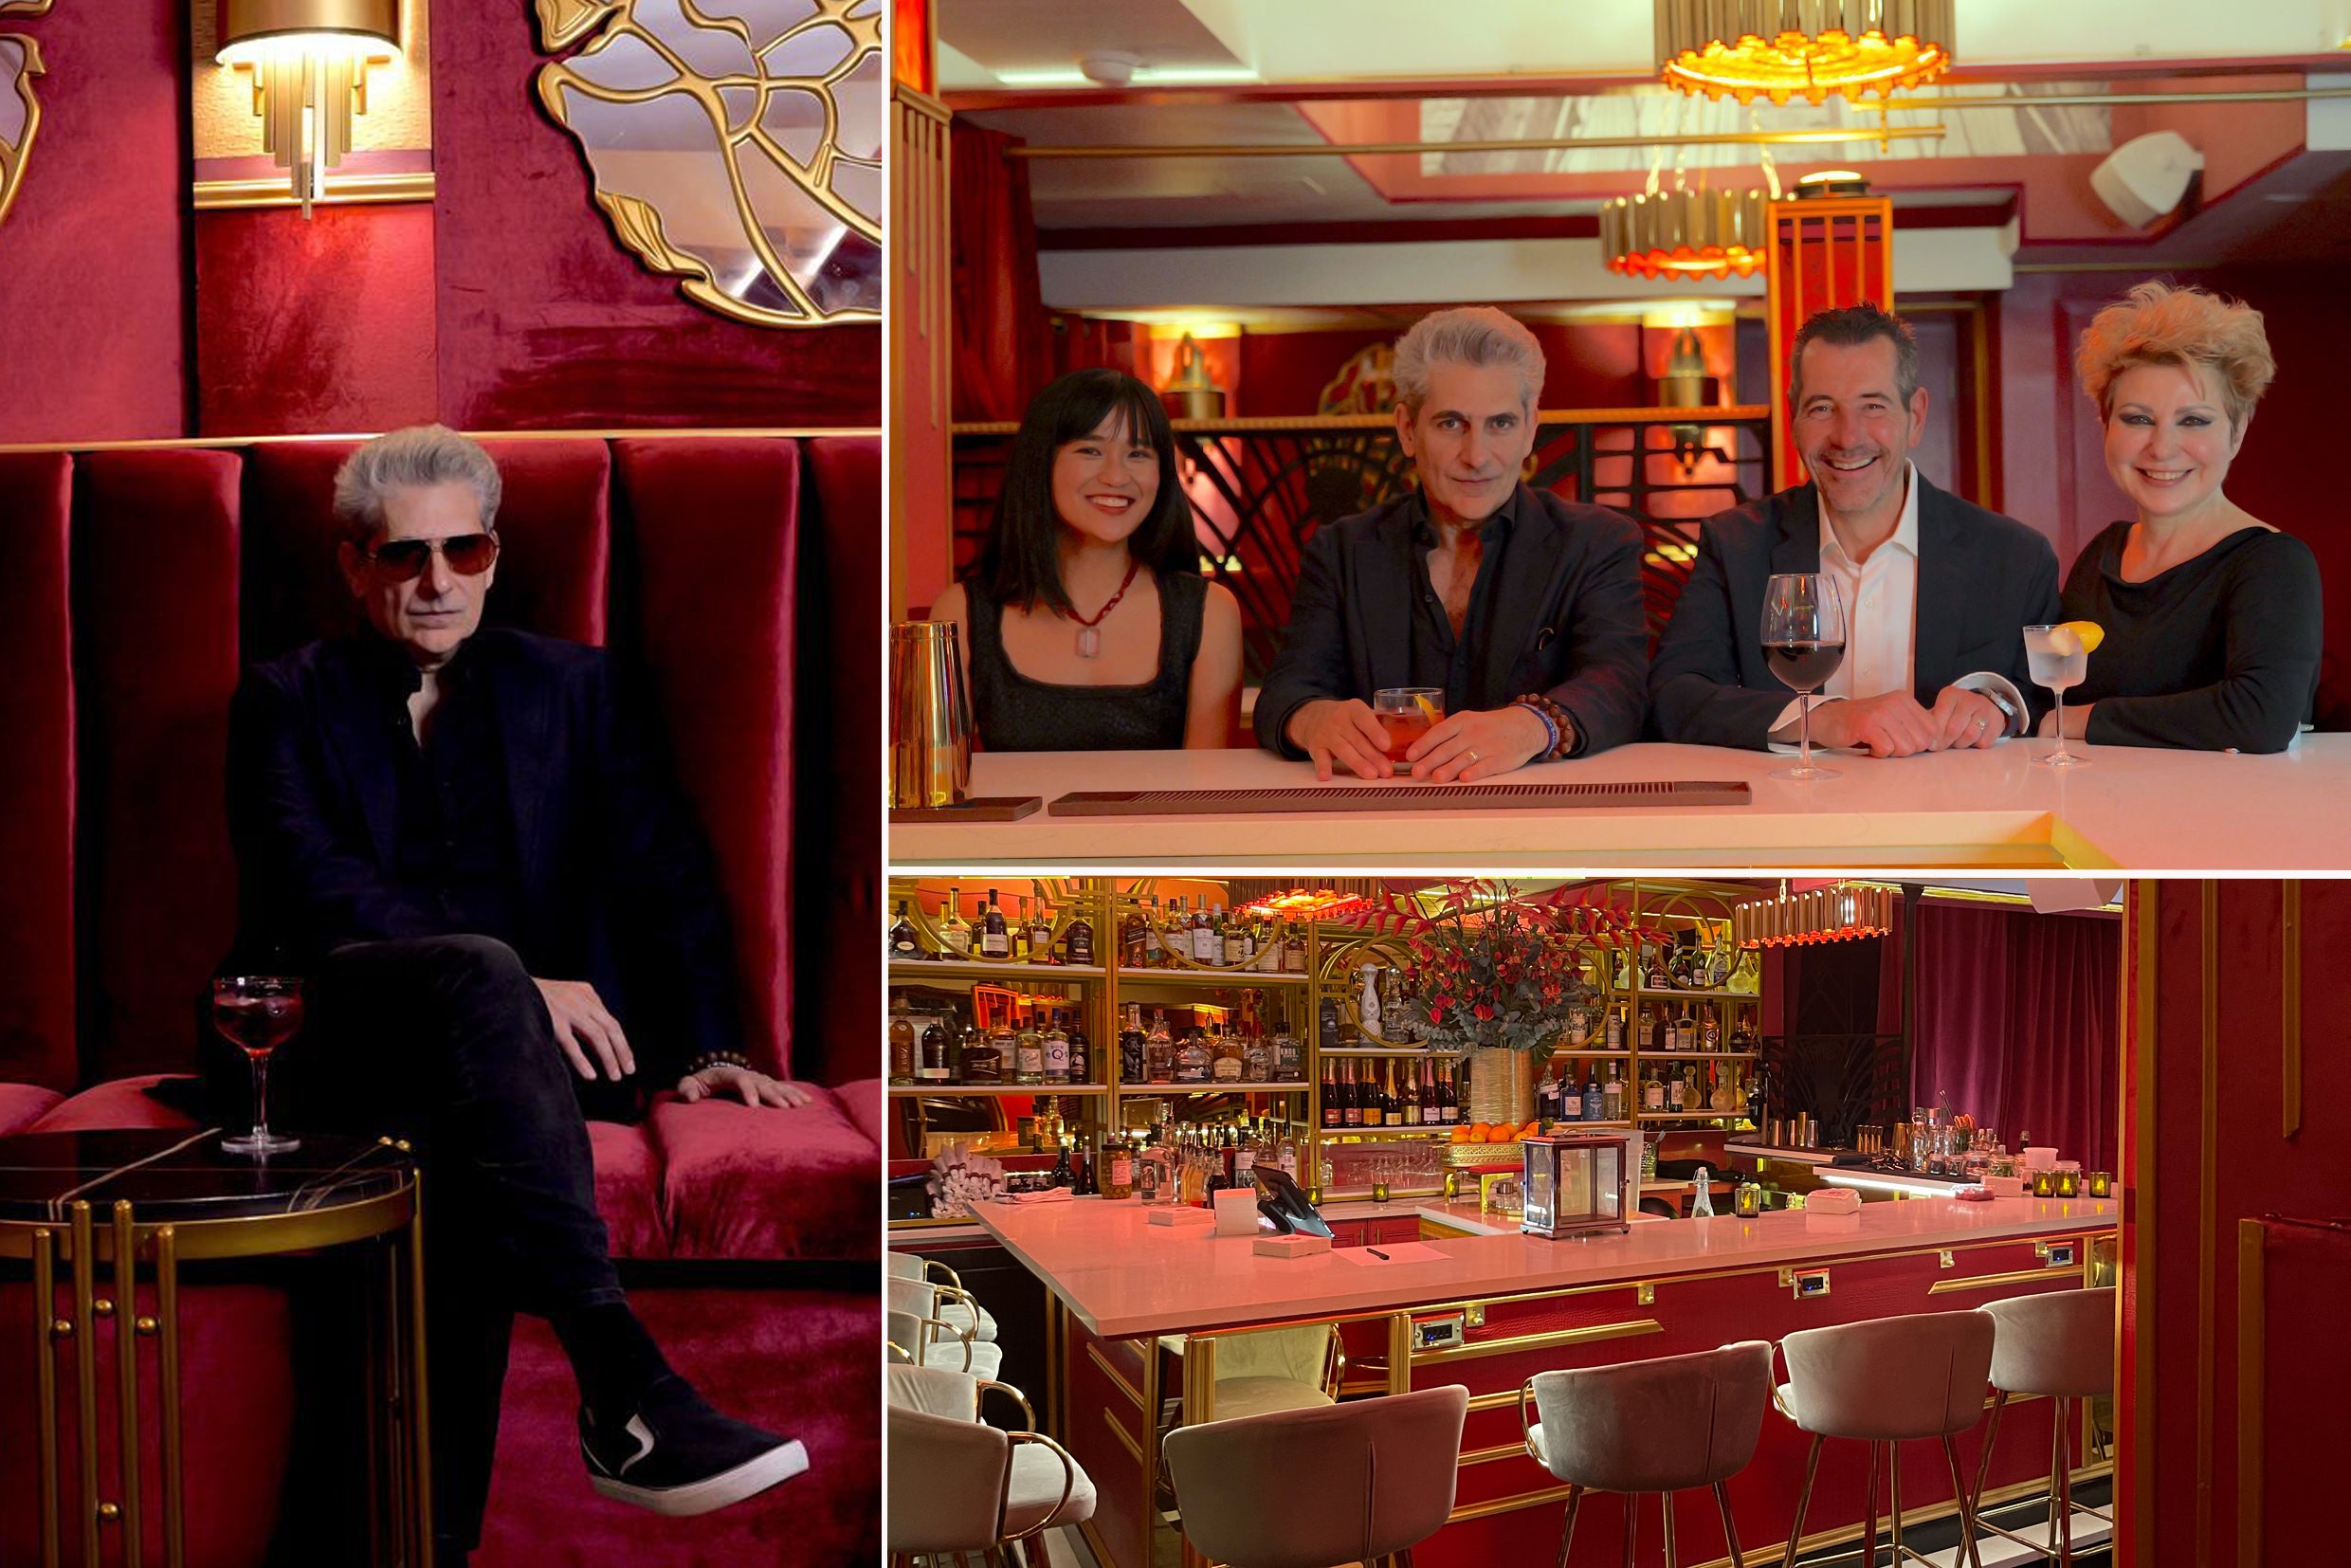 Left: Michael Imperioli at the Scarlet Lounge; Top right: Kenna Wladis, Michael Imperioli, Jeremy Wladis, and Victoria Imperioli inside the bar; Bottom right: The Scarlet Lounge